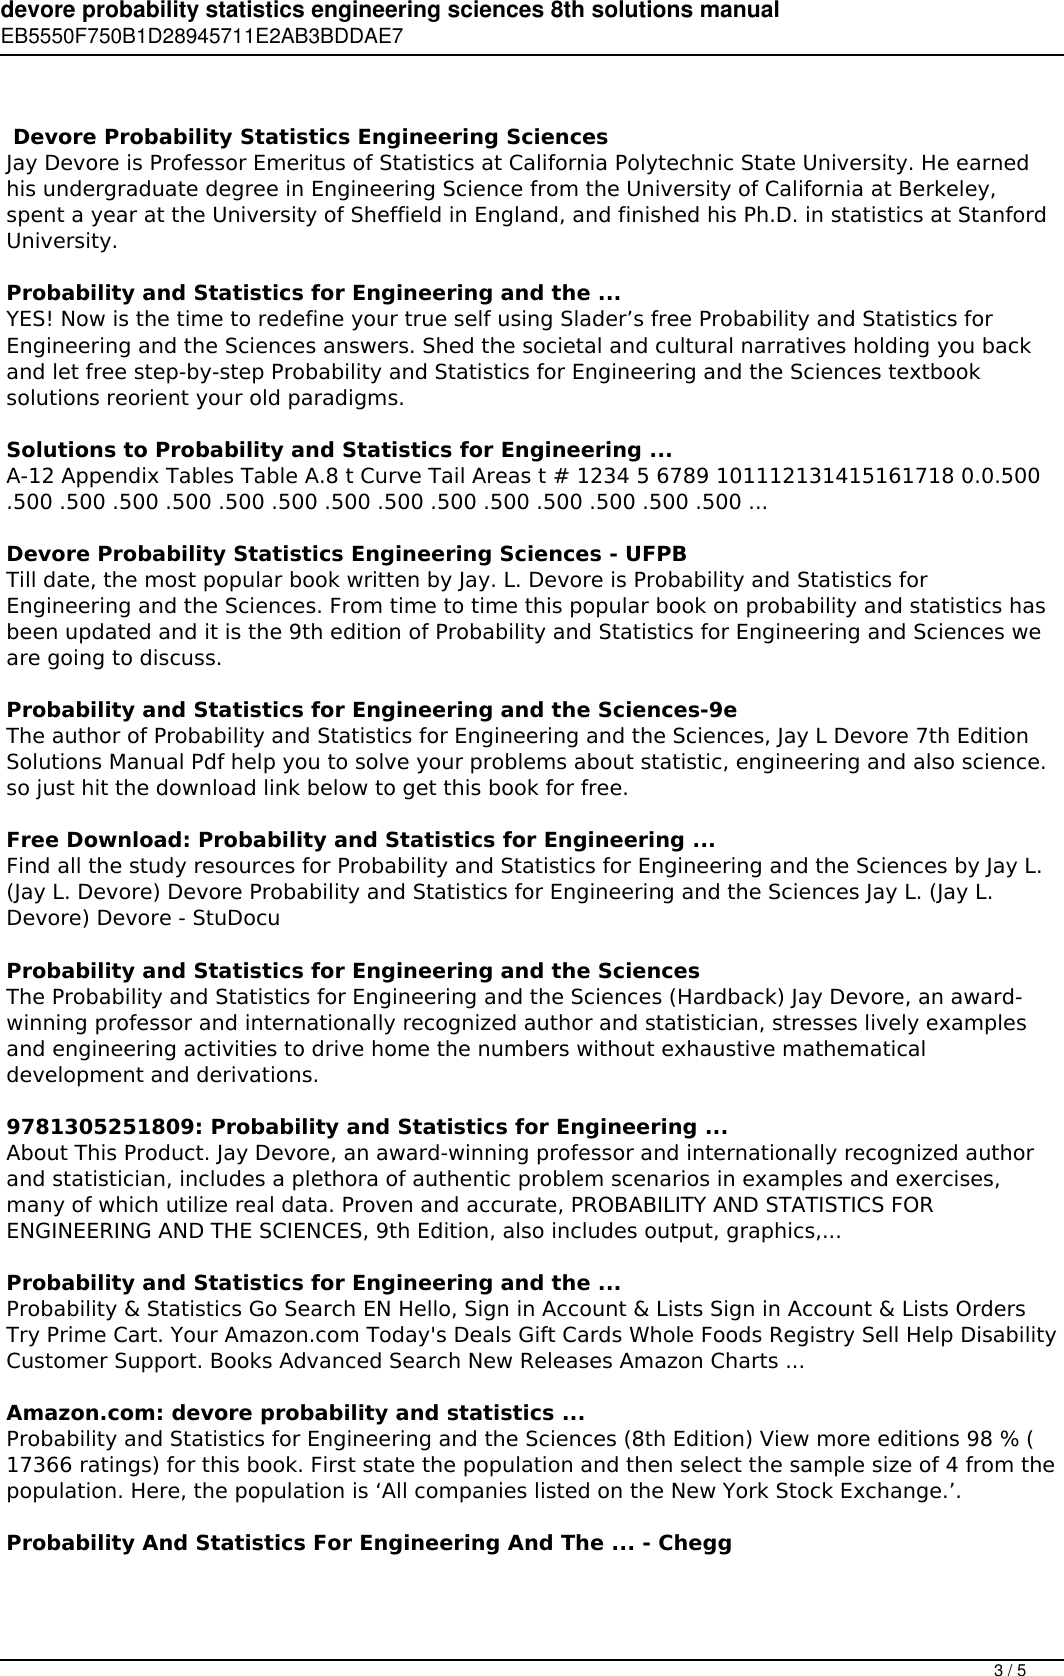 Page 3 of 5 - Devore Probability Statistics Engineering Sciences 8th Solutions Manual